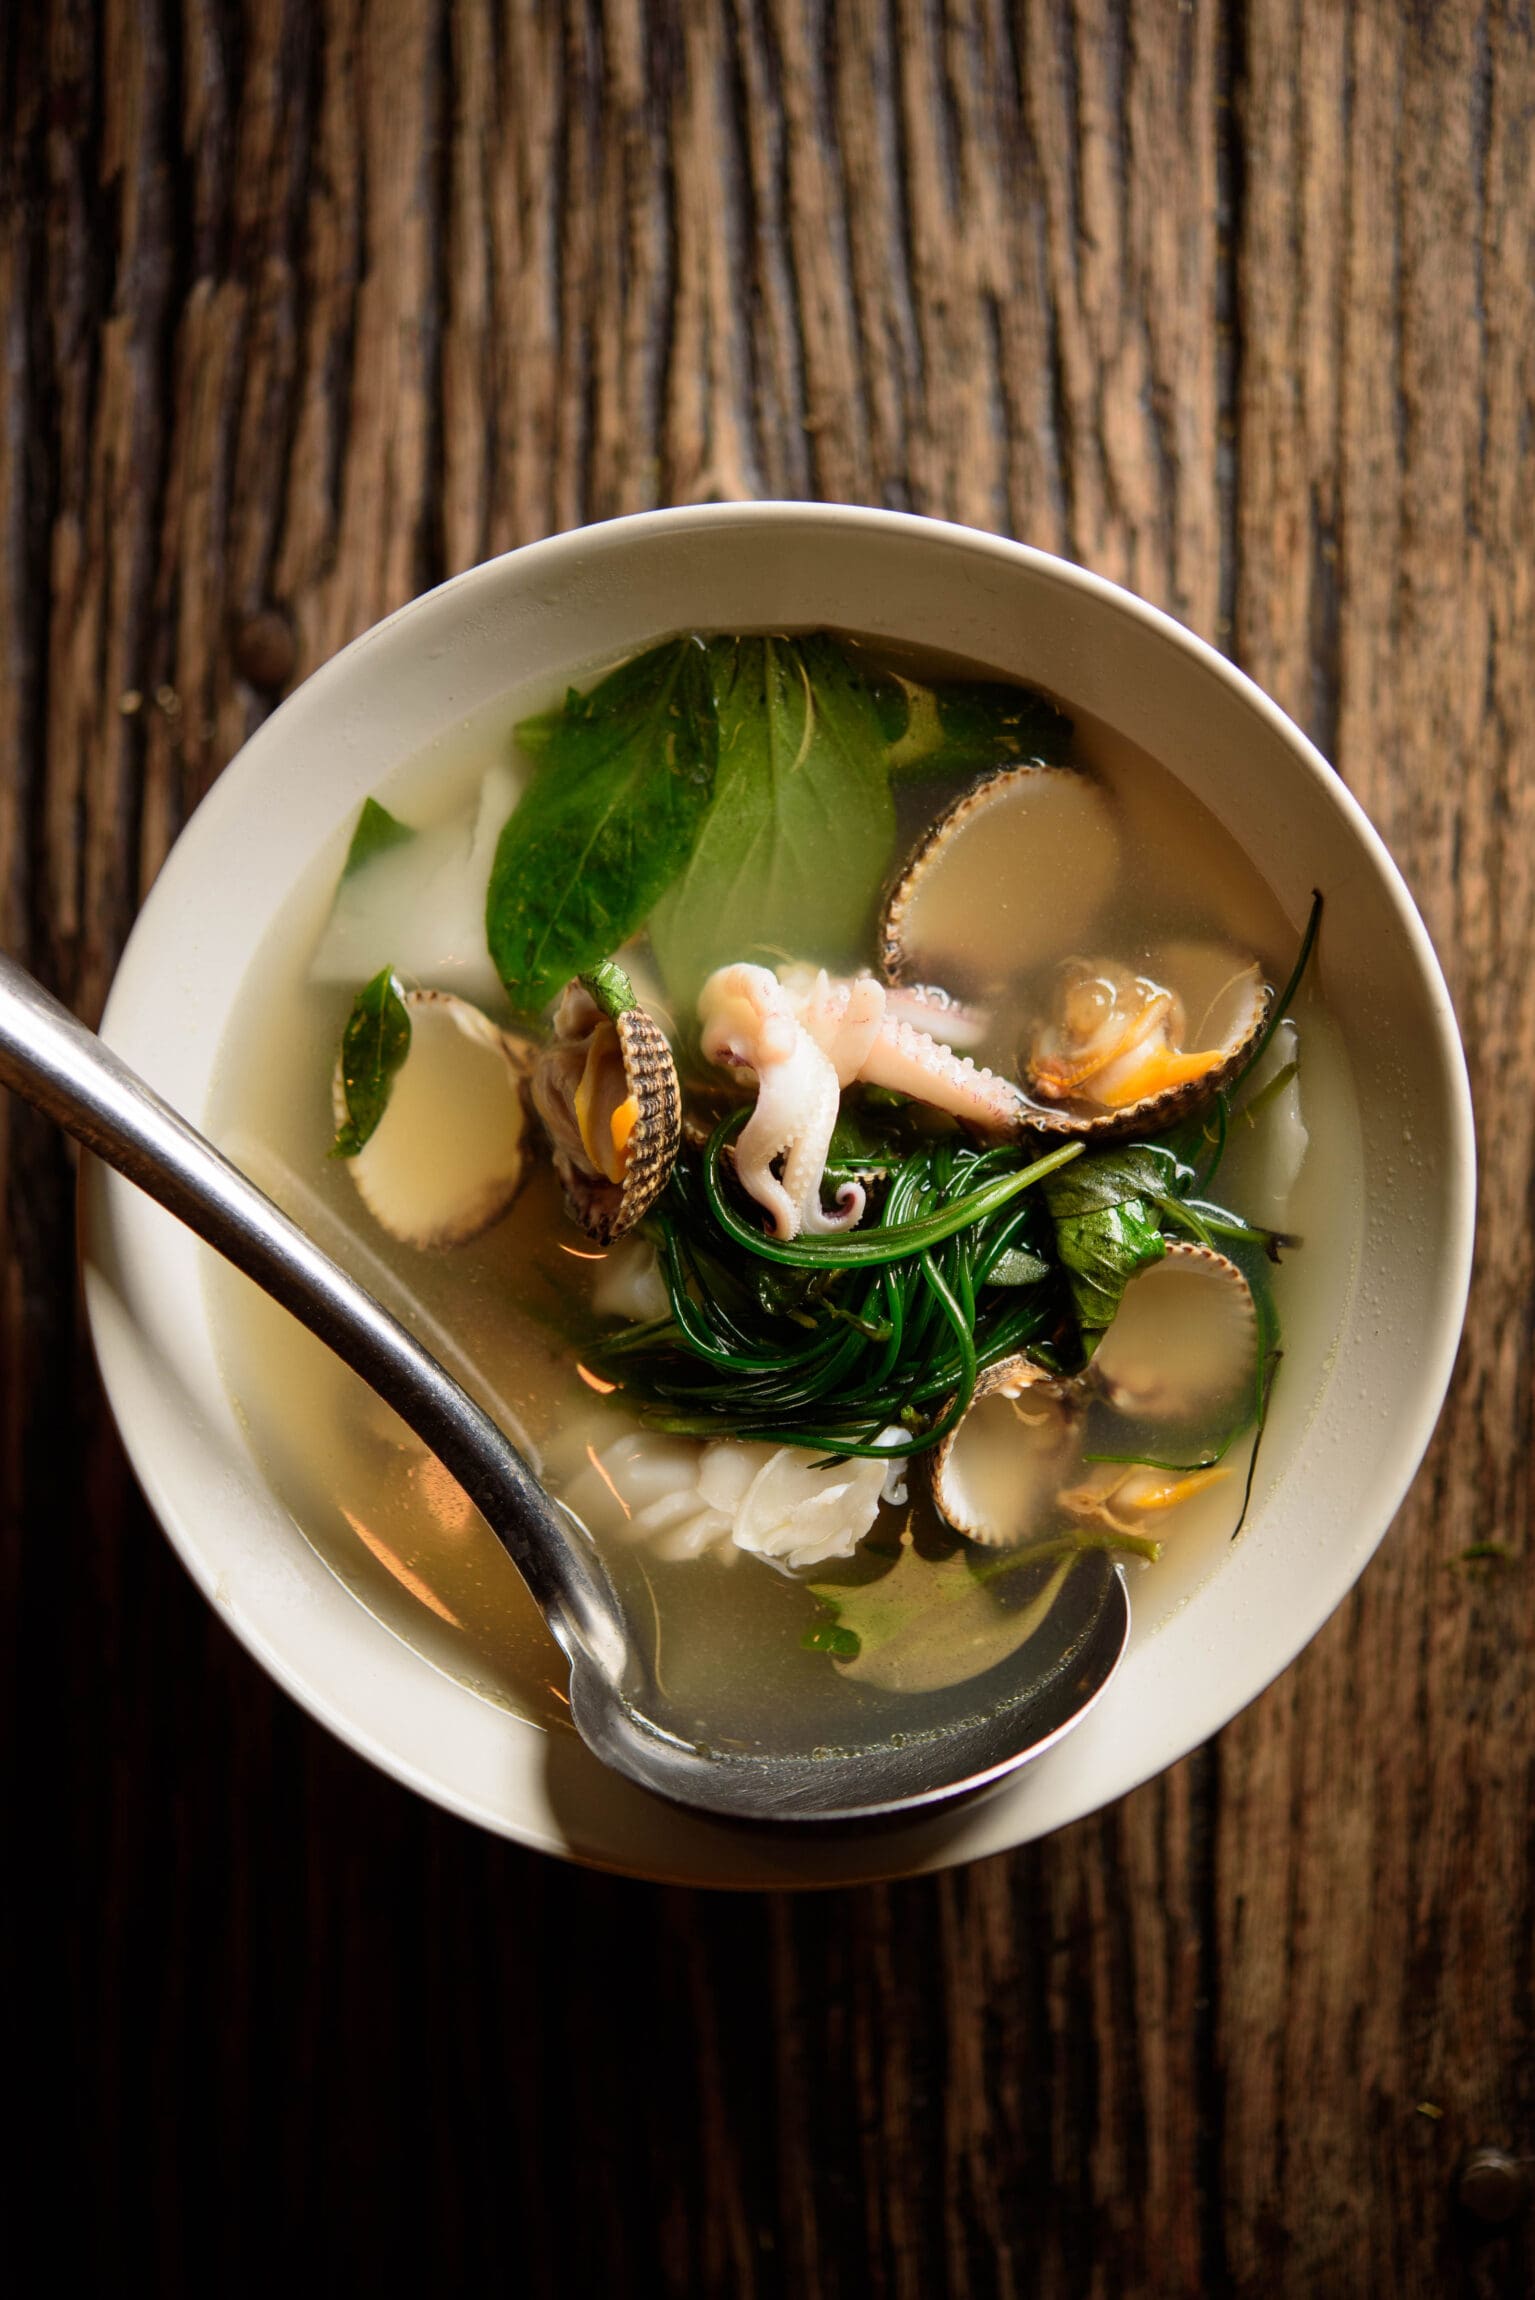 A seafood broth served at Som Saa in a white bowl on a wooden table with a steel spoon placed inside.